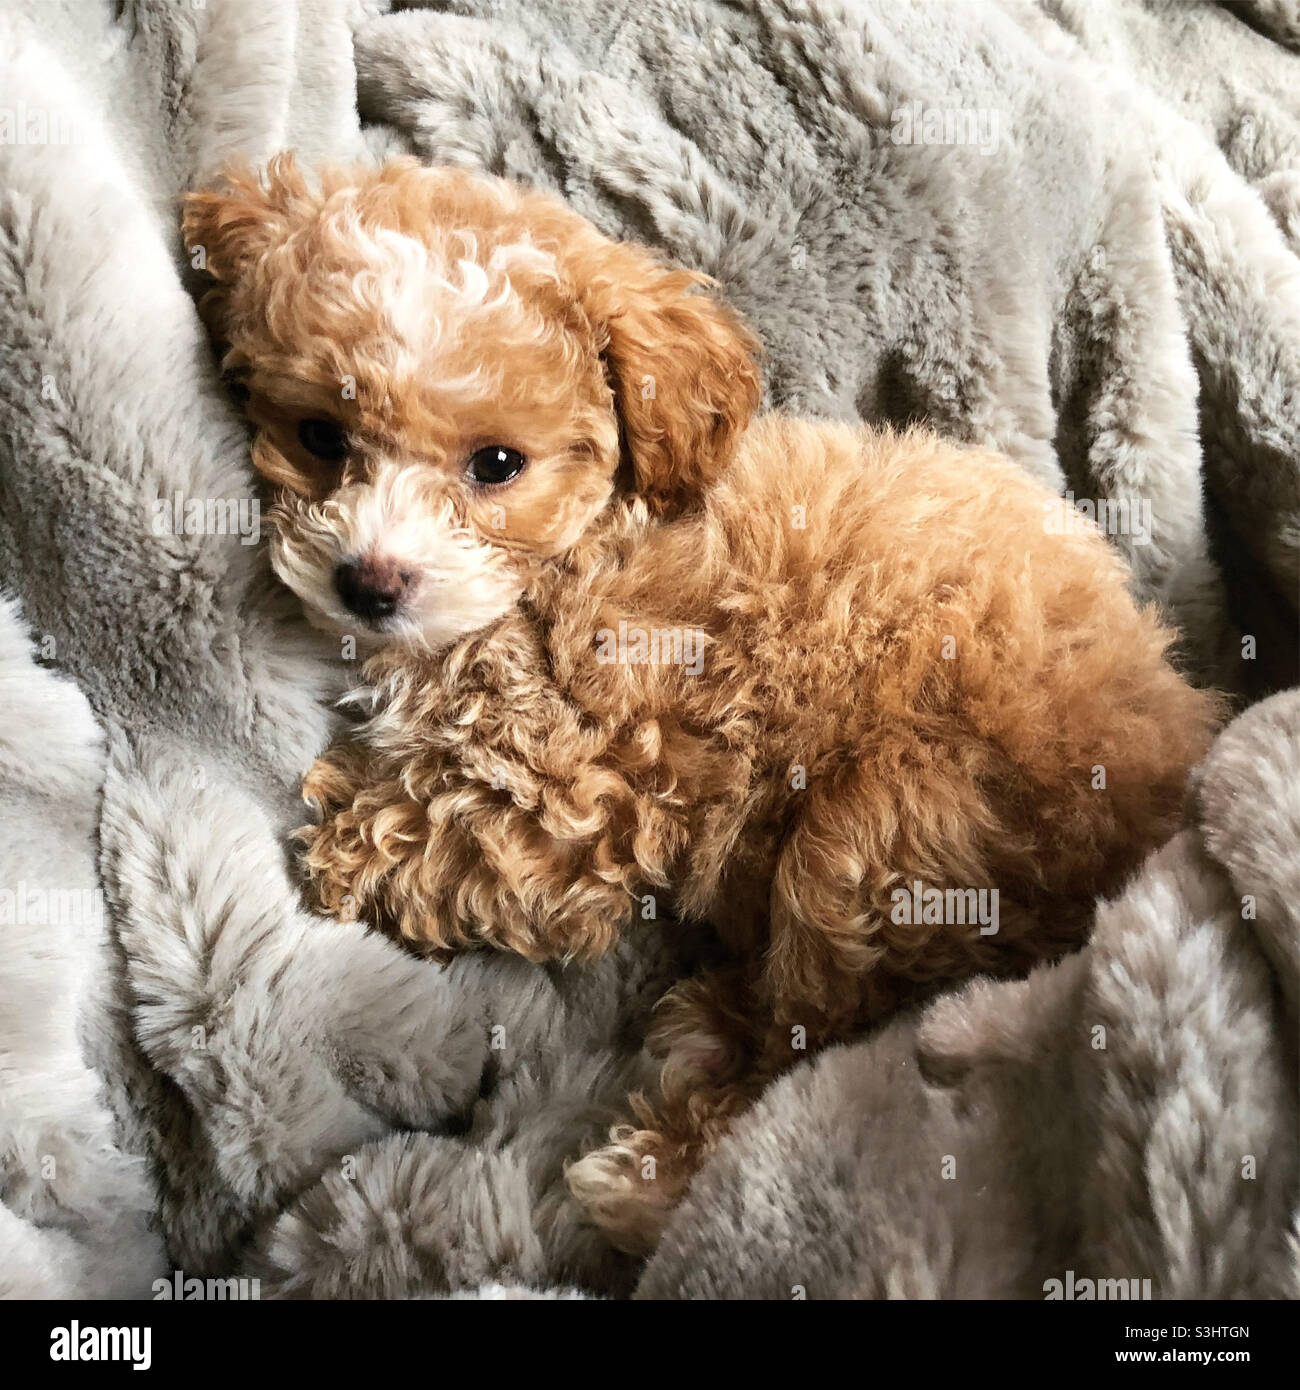 https://c8.alamy.com/comp/S3HTGN/cute-maltipoo-puppy-lays-cuddled-up-on-soft-fuzzy-gray-blanket-S3HTGN.jpg